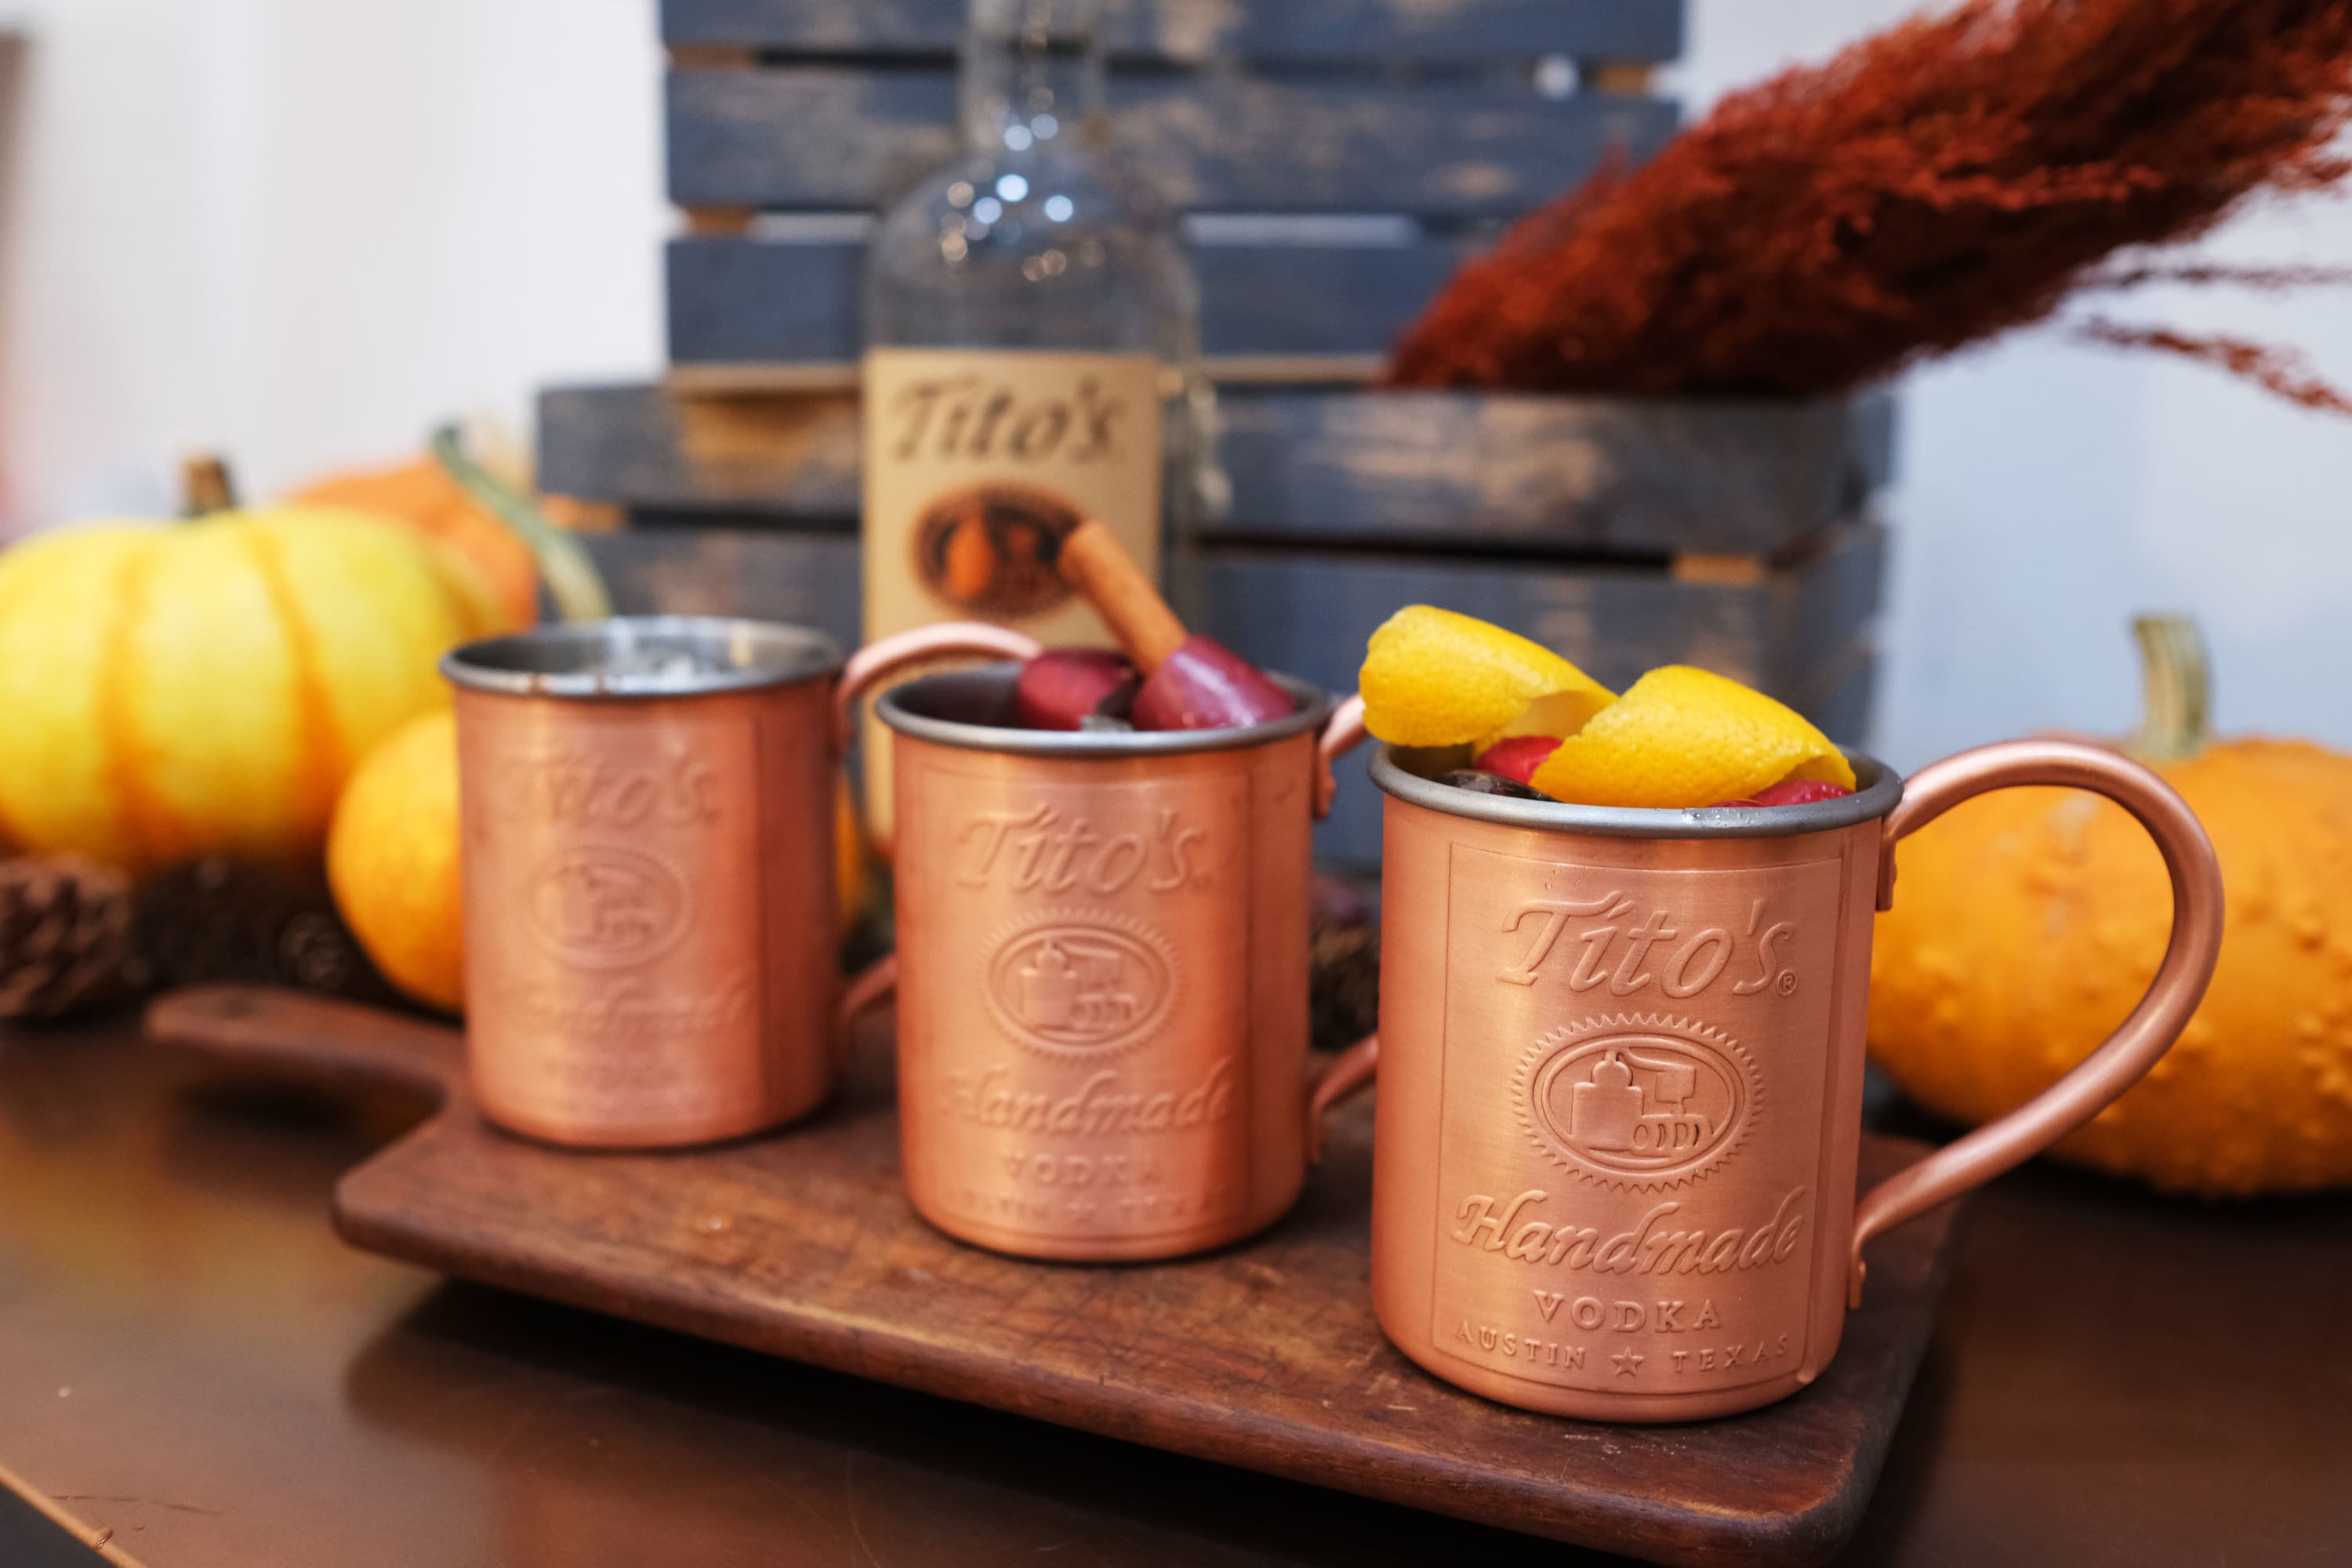 Tito's Vodka Moscow Mule with berries and lemon